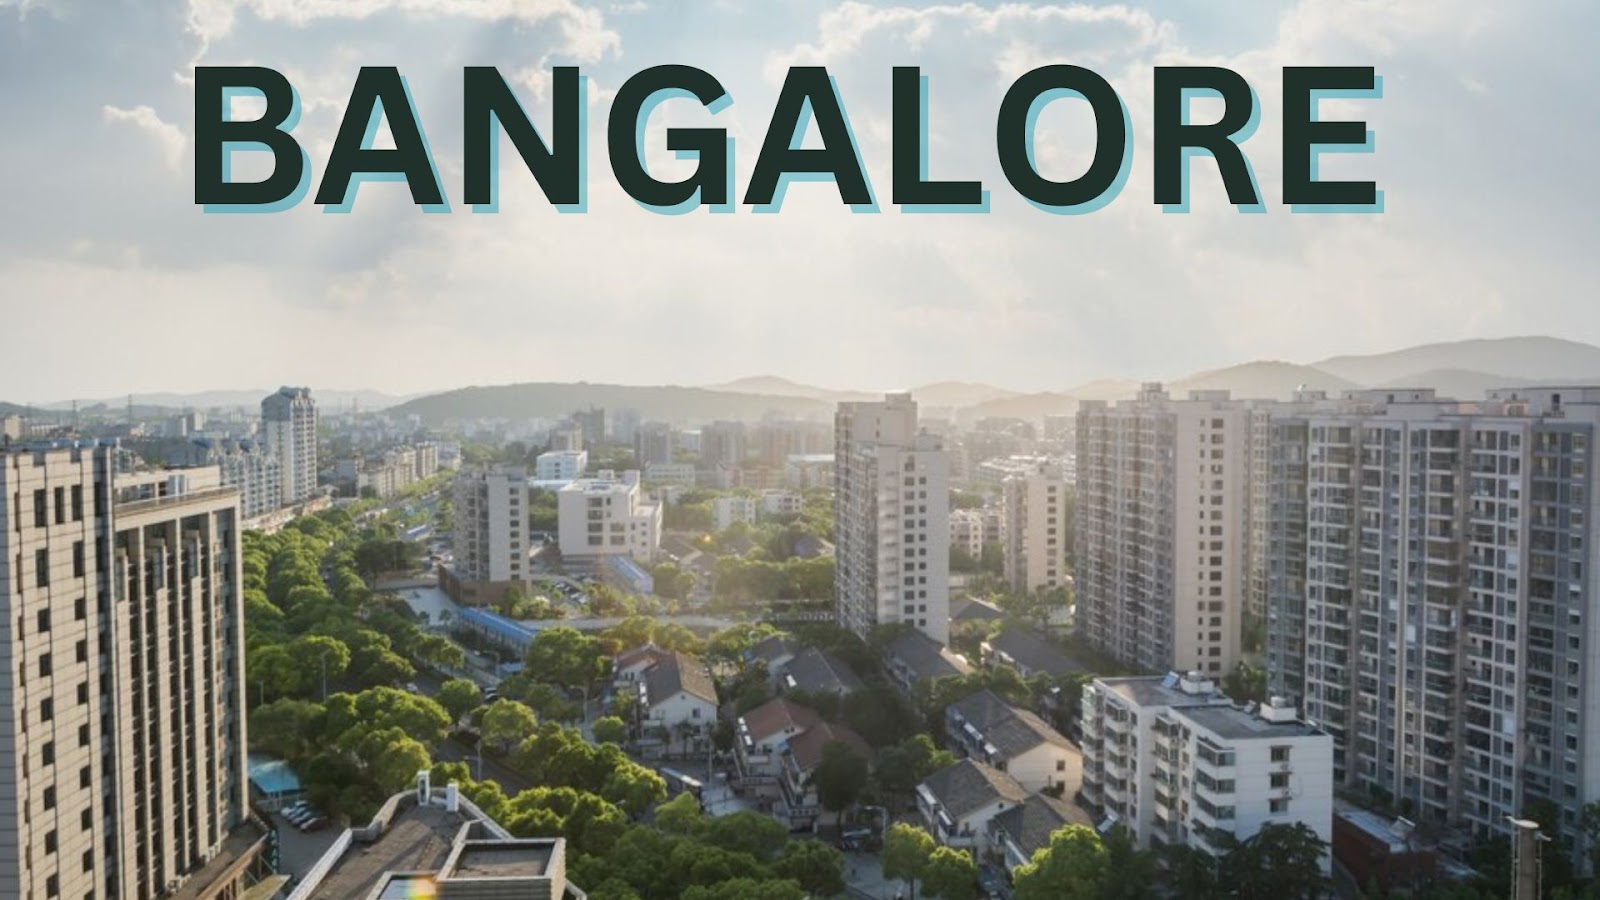 Bangalore is becoming one of the best places to buy a house in India.